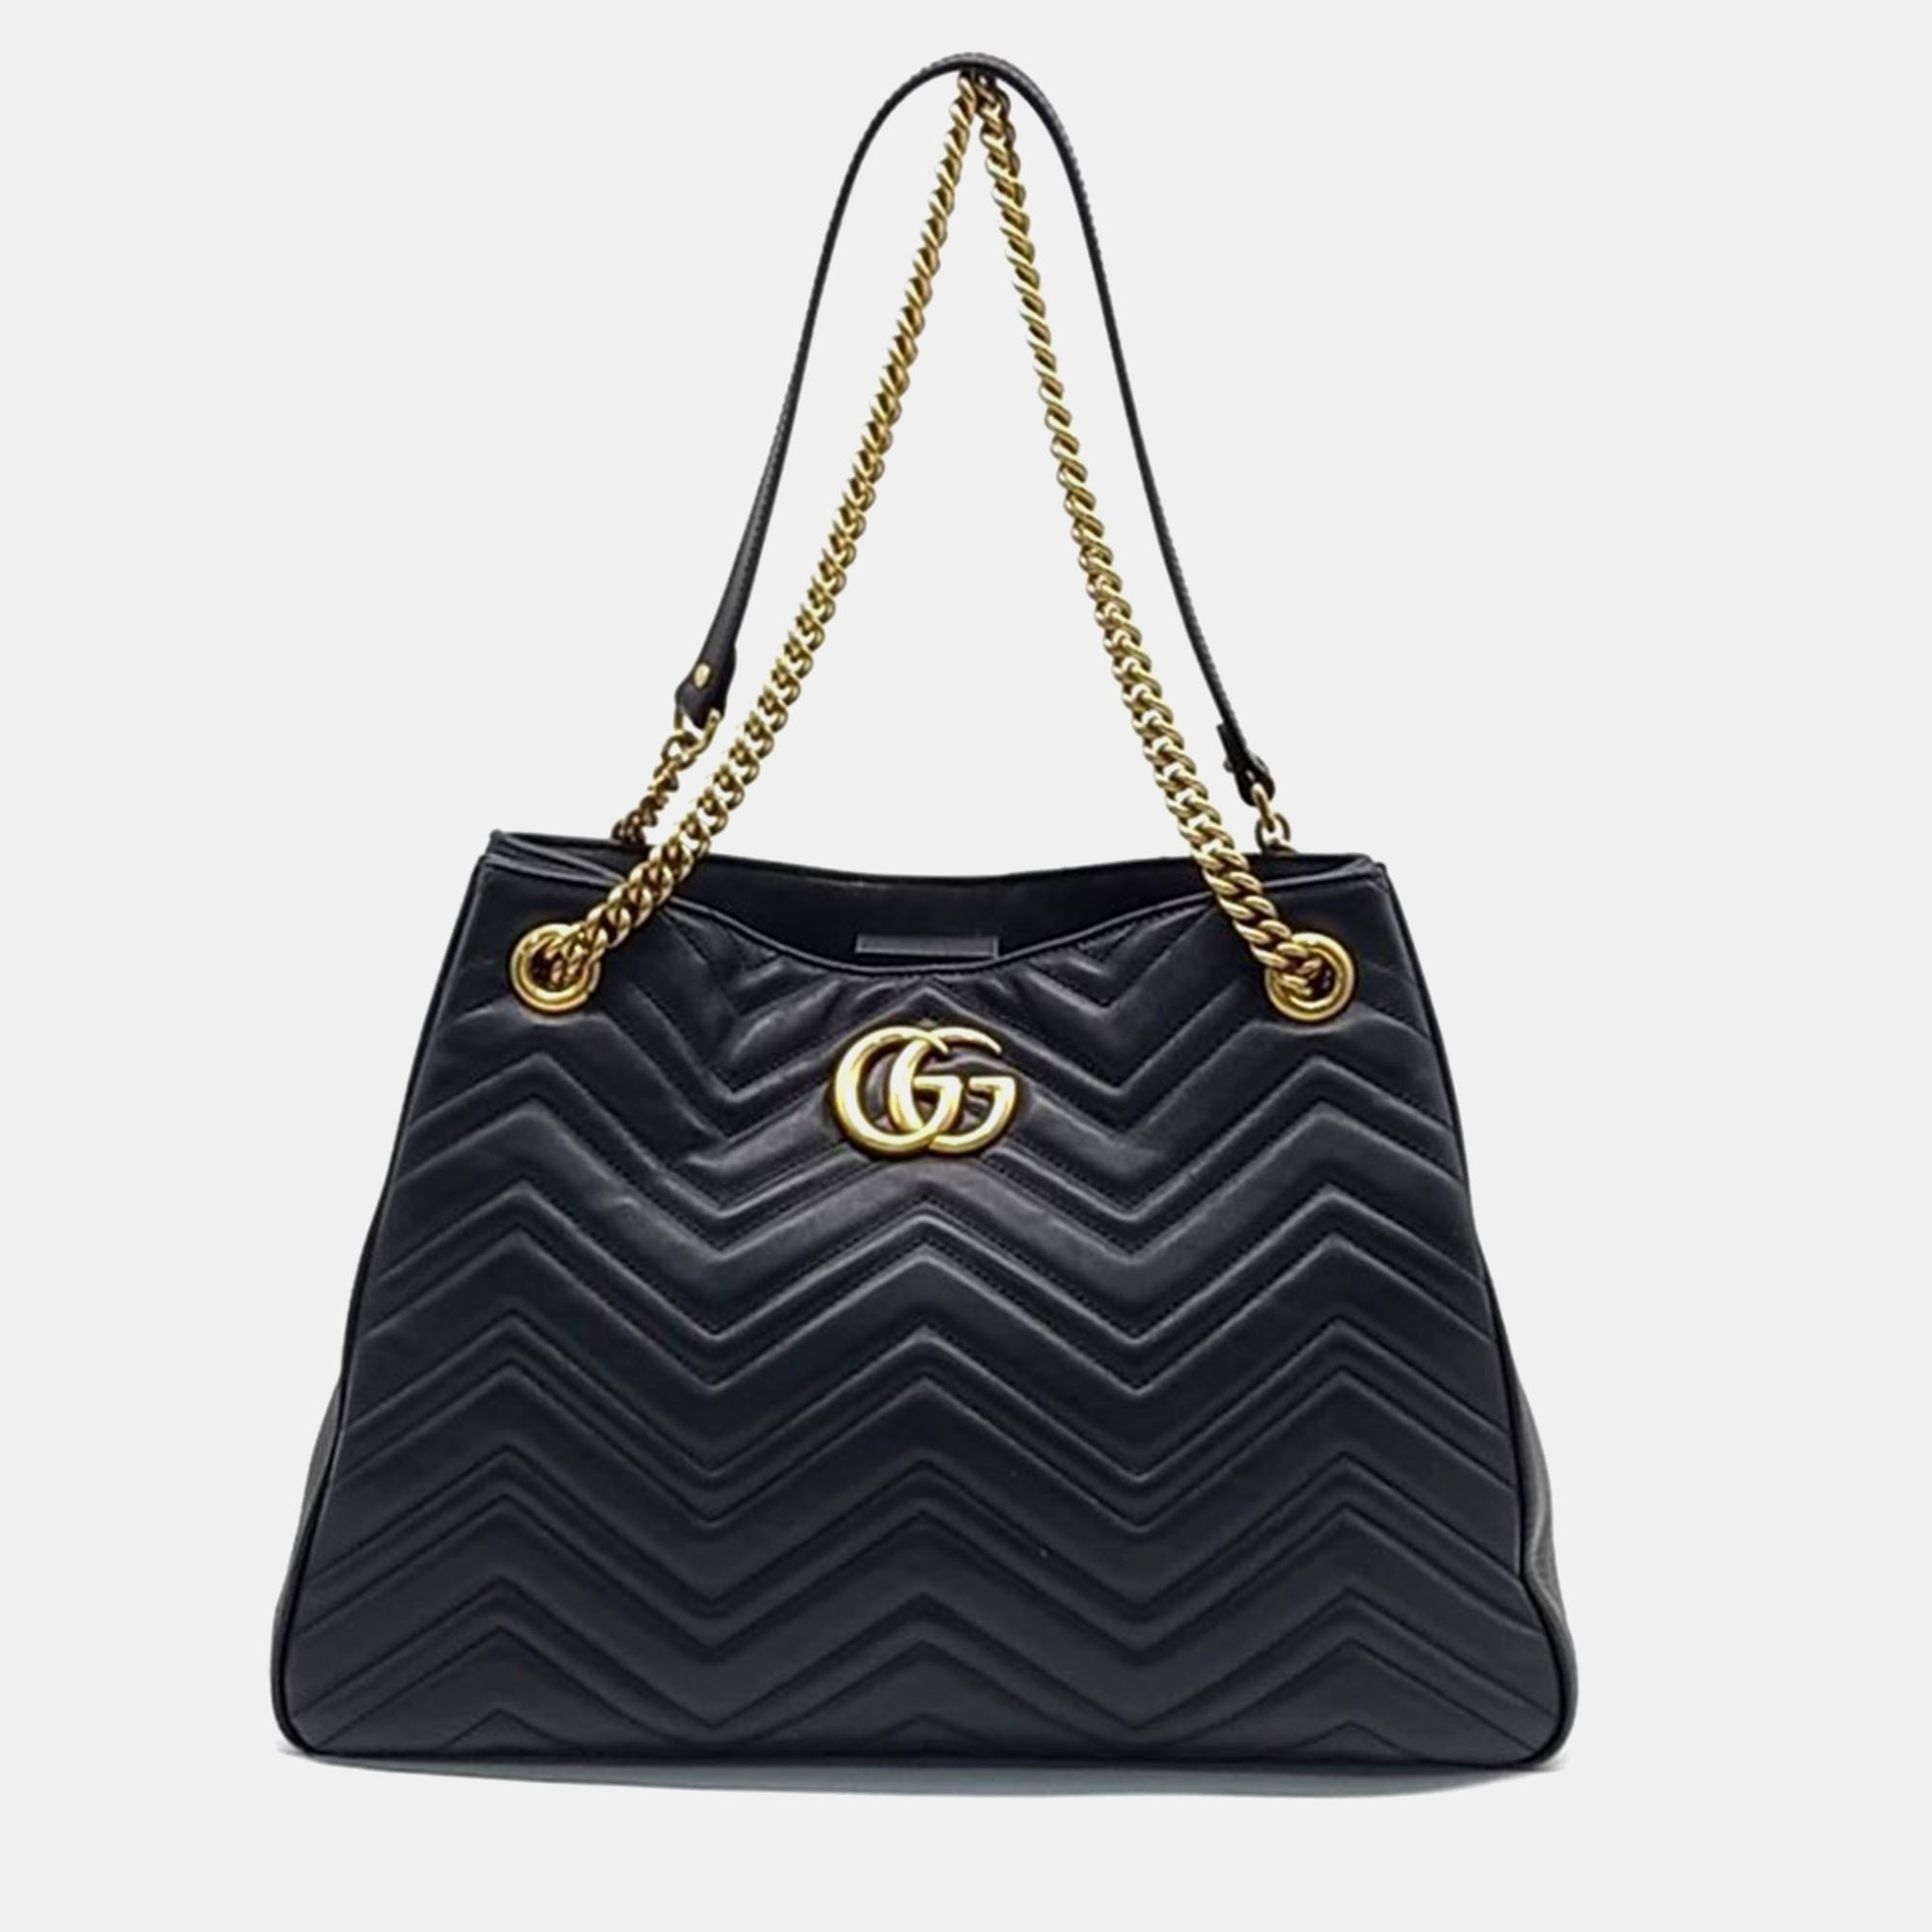 

Gucci Black Leather GG Marmont Tote Bag